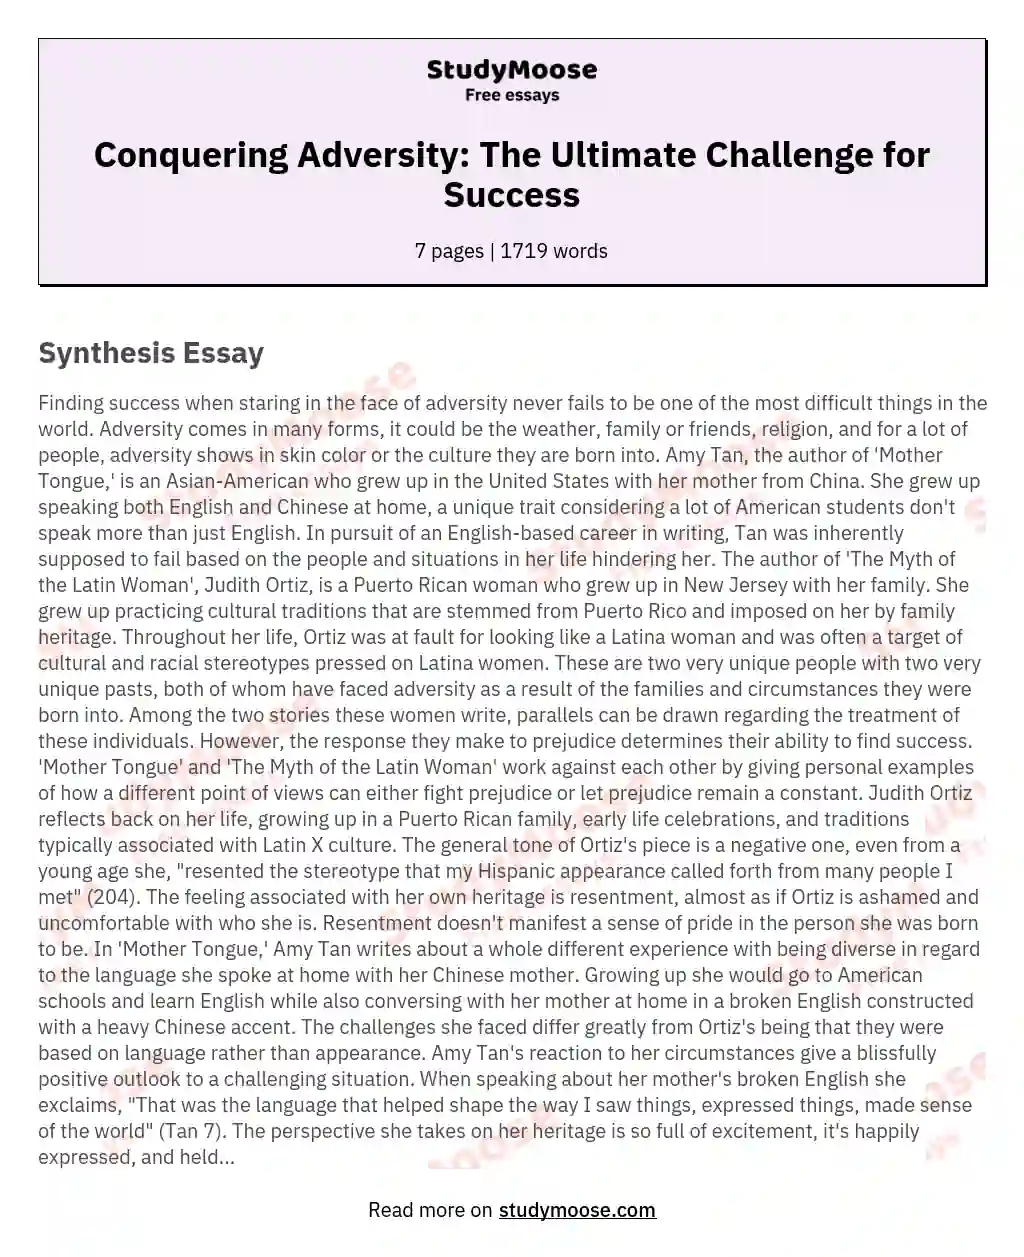 Conquering Adversity: The Ultimate Challenge for Success essay